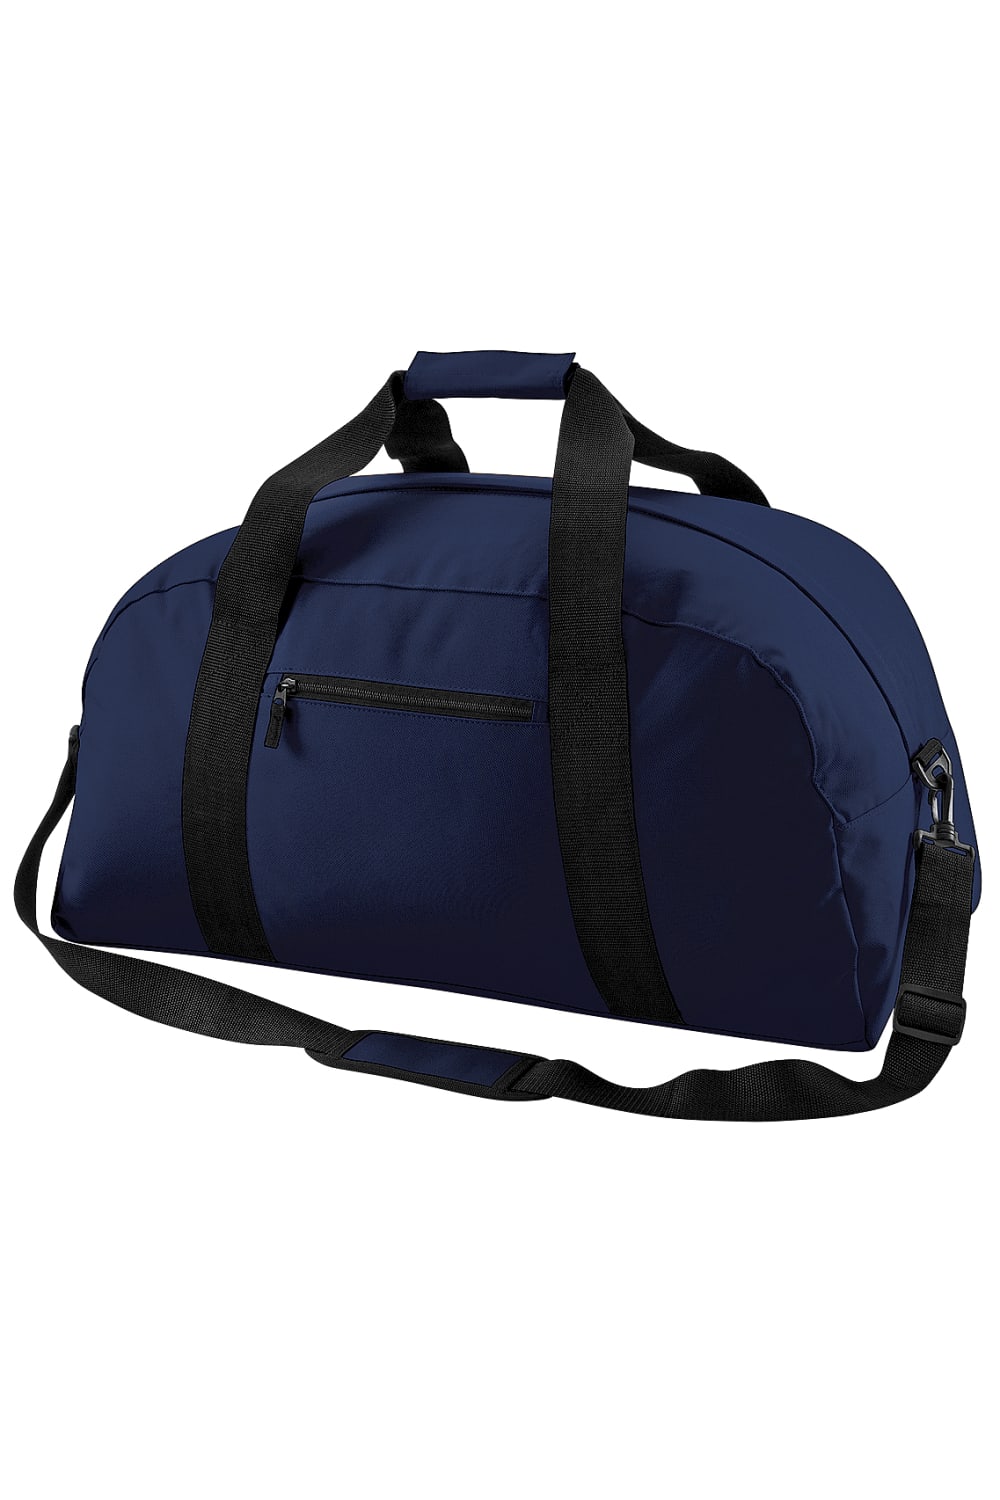 BagBase Classic Holdall / Duffel Travel Bag (Pack of 2) (French Navy) (One Size)